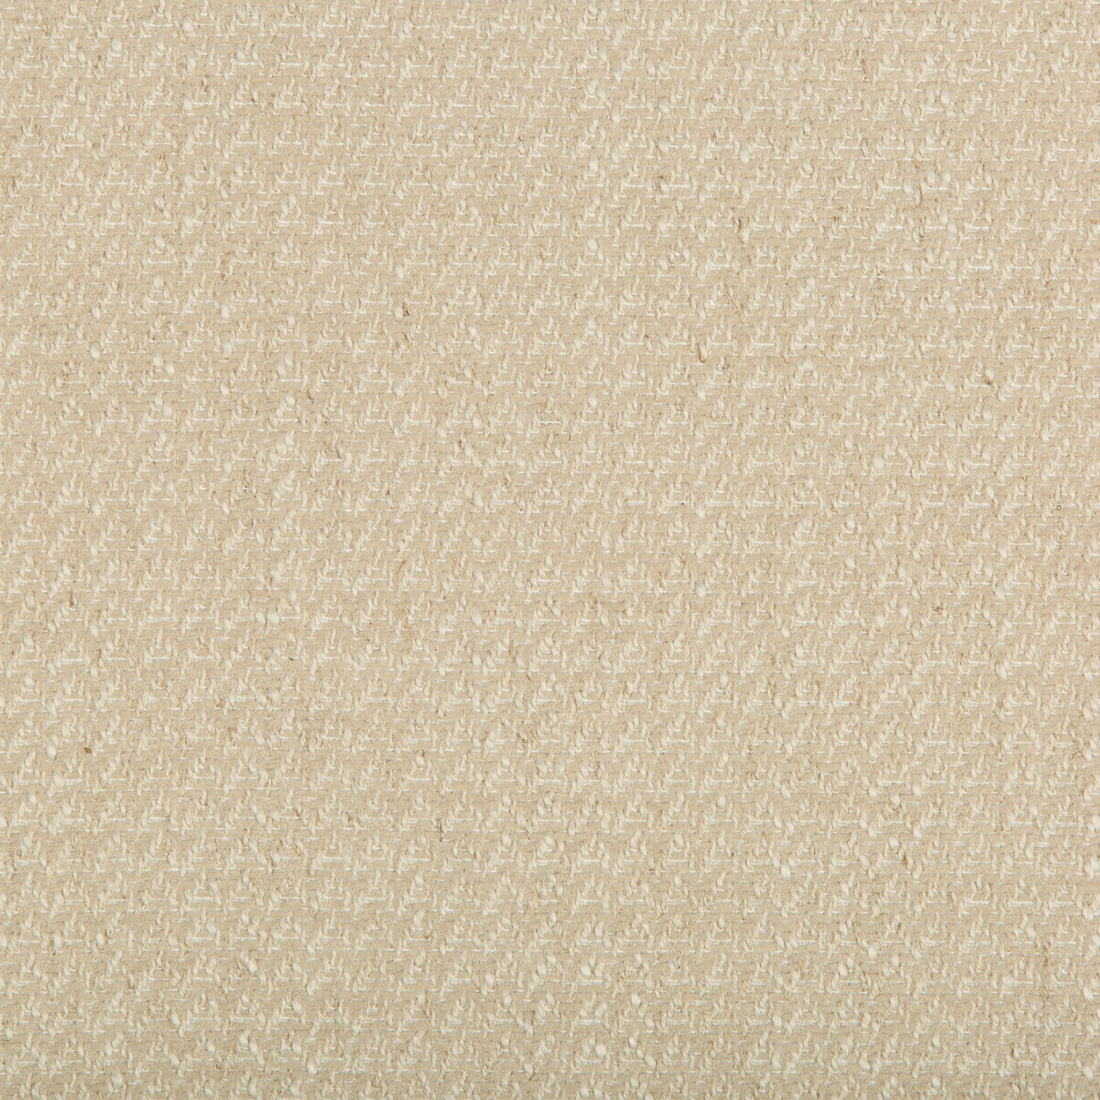 Kravet Smart fabric in 35394-16 color - pattern 35394.16.0 - by Kravet Smart in the Performance Crypton Home collection